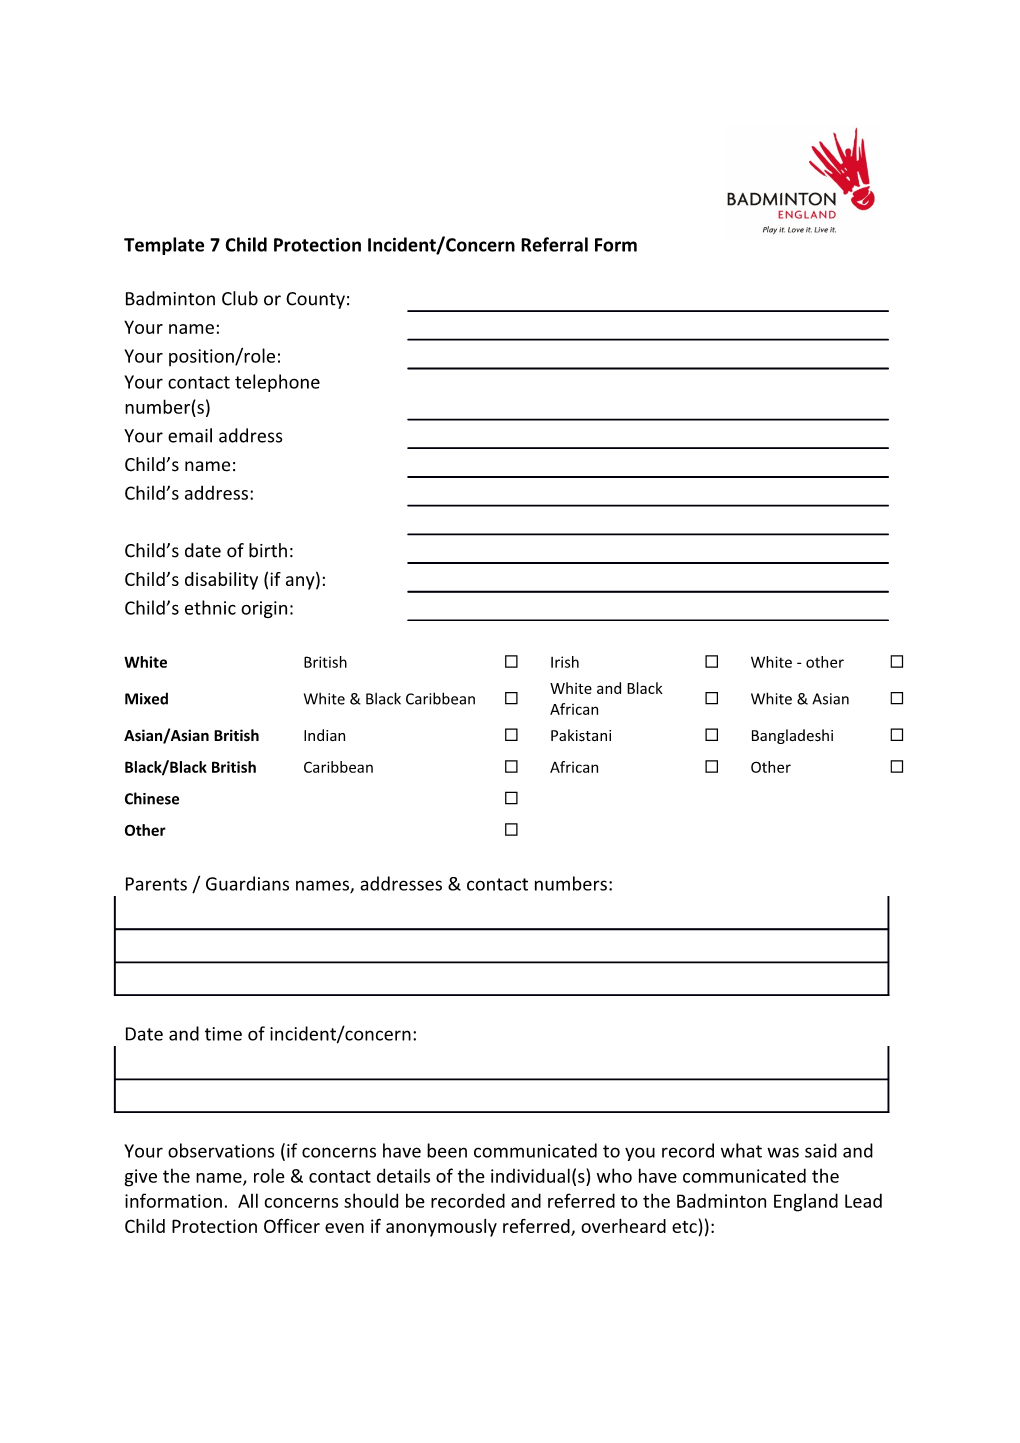 Template 7 Child Protection Incident/Concern Referral Form